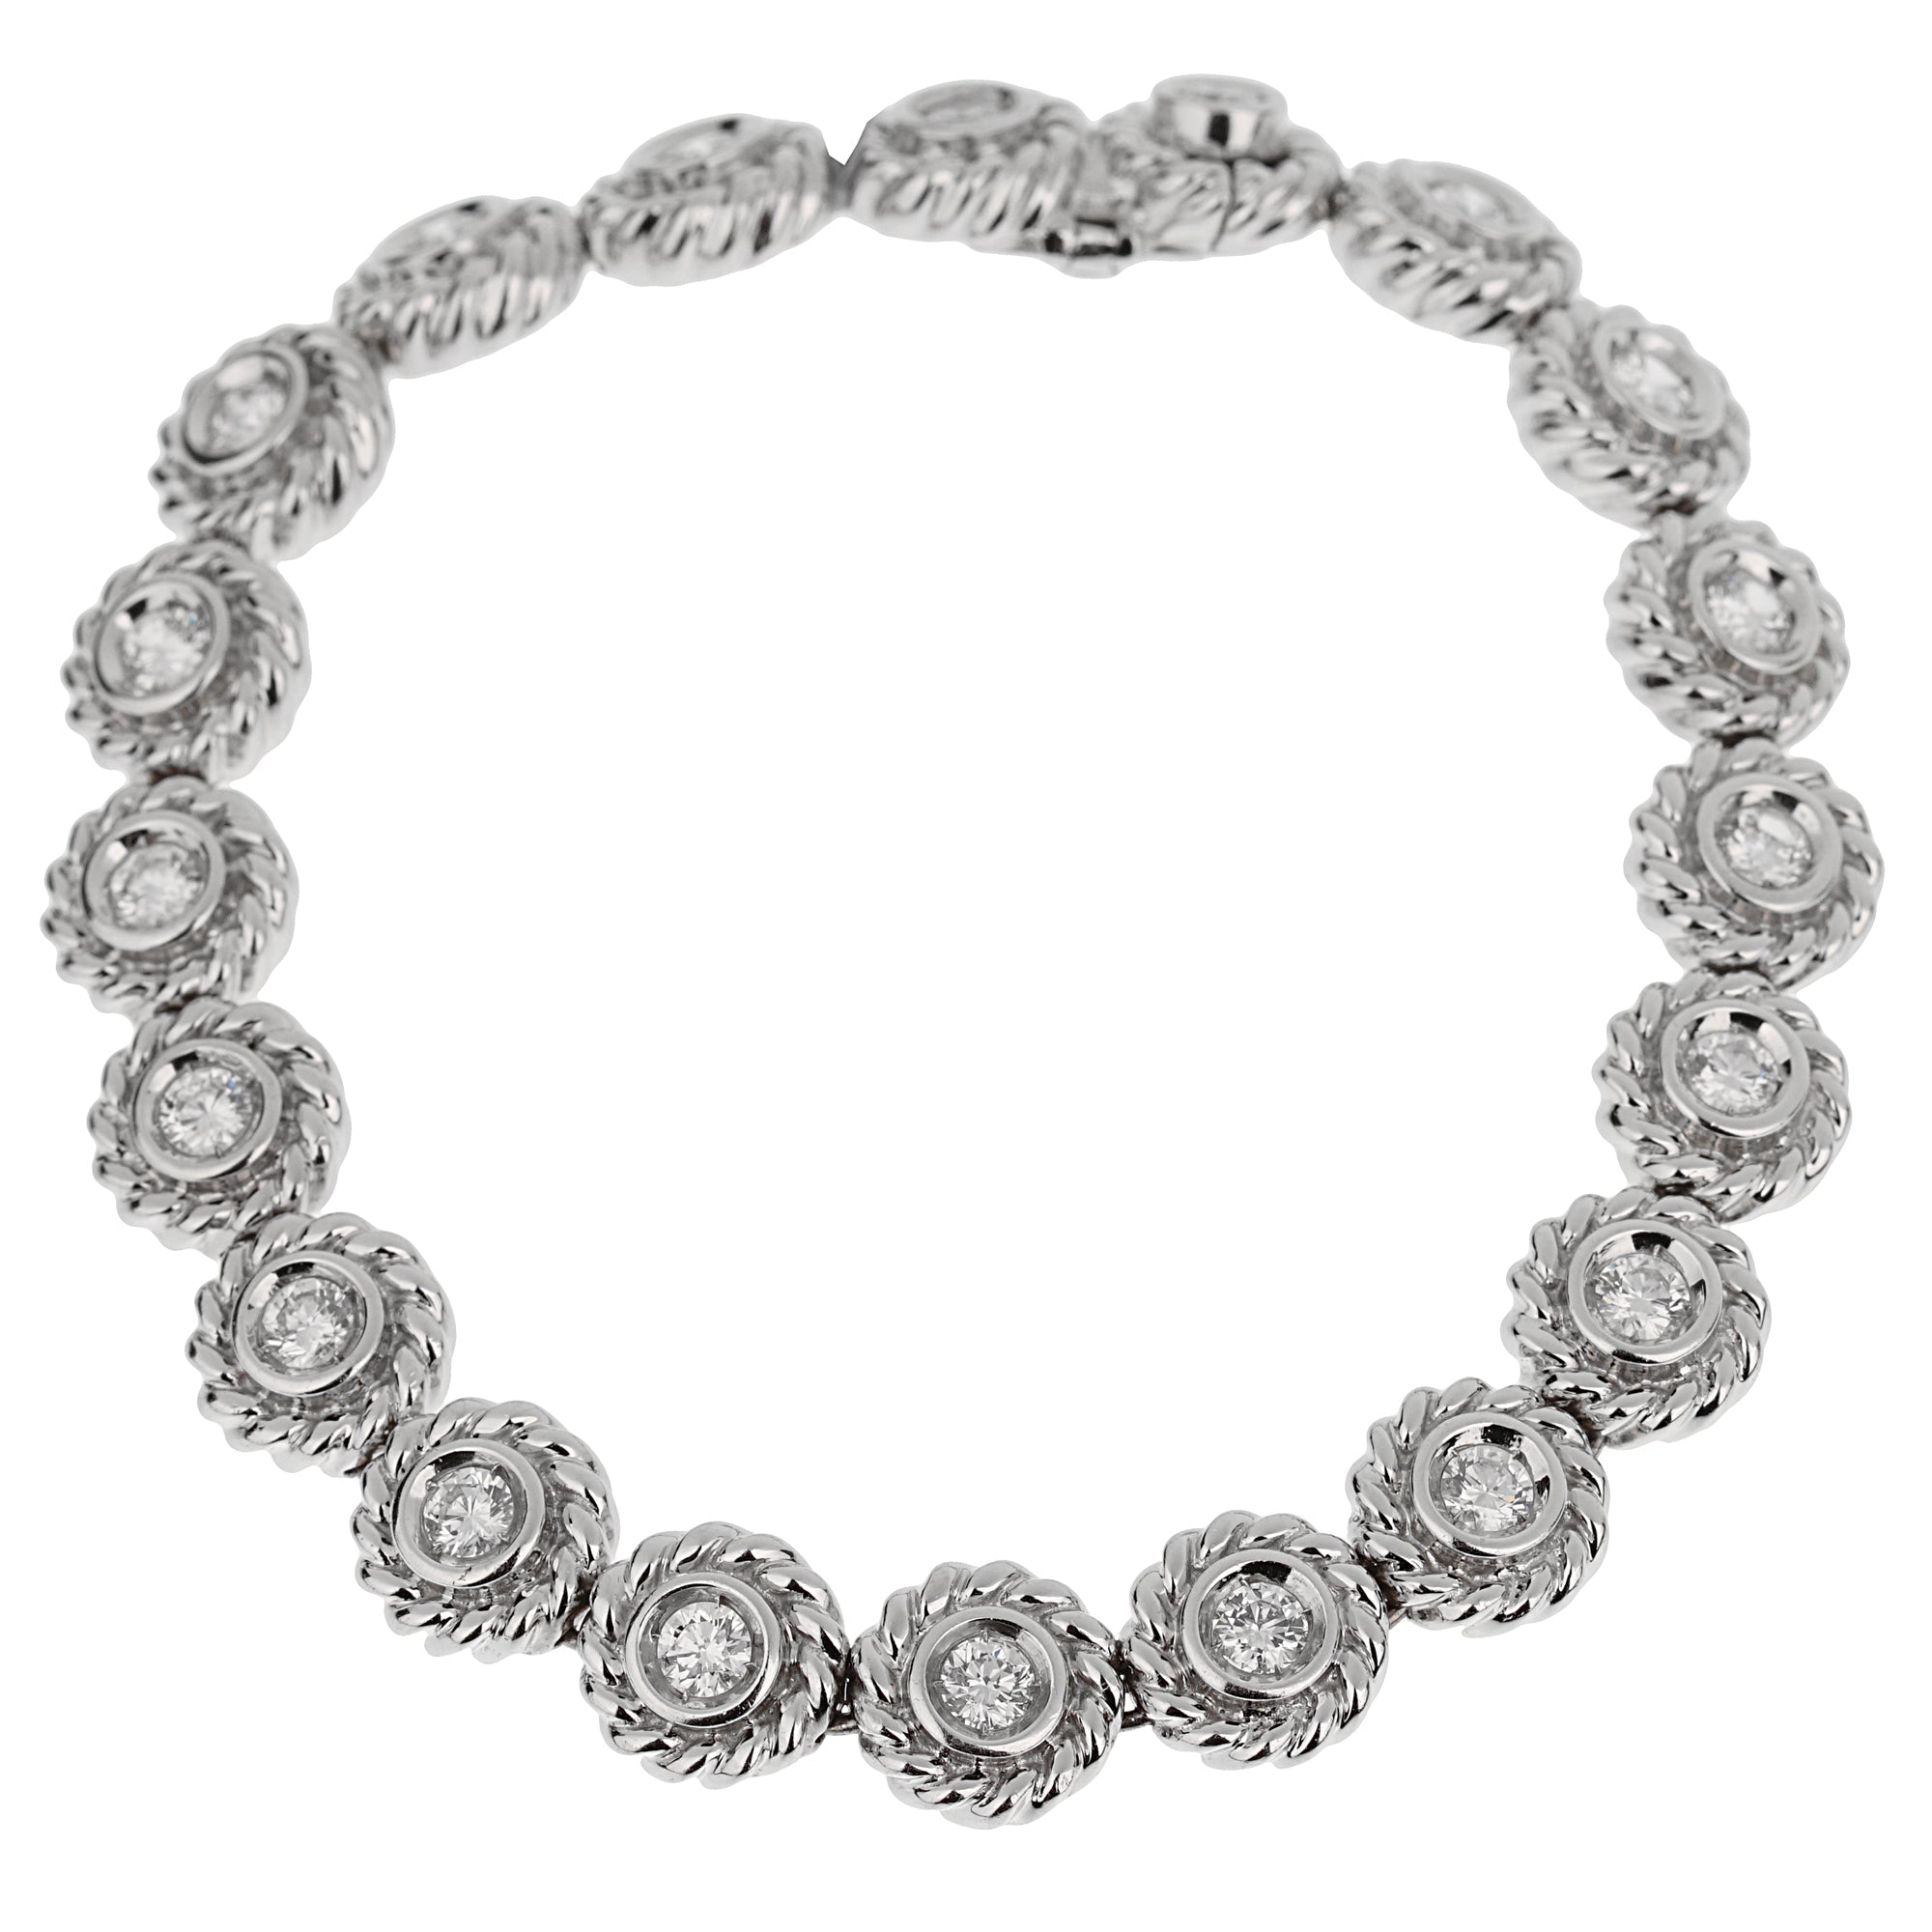 Idylle Blossom Two-Row Bracelet, White Gold And Diamonds